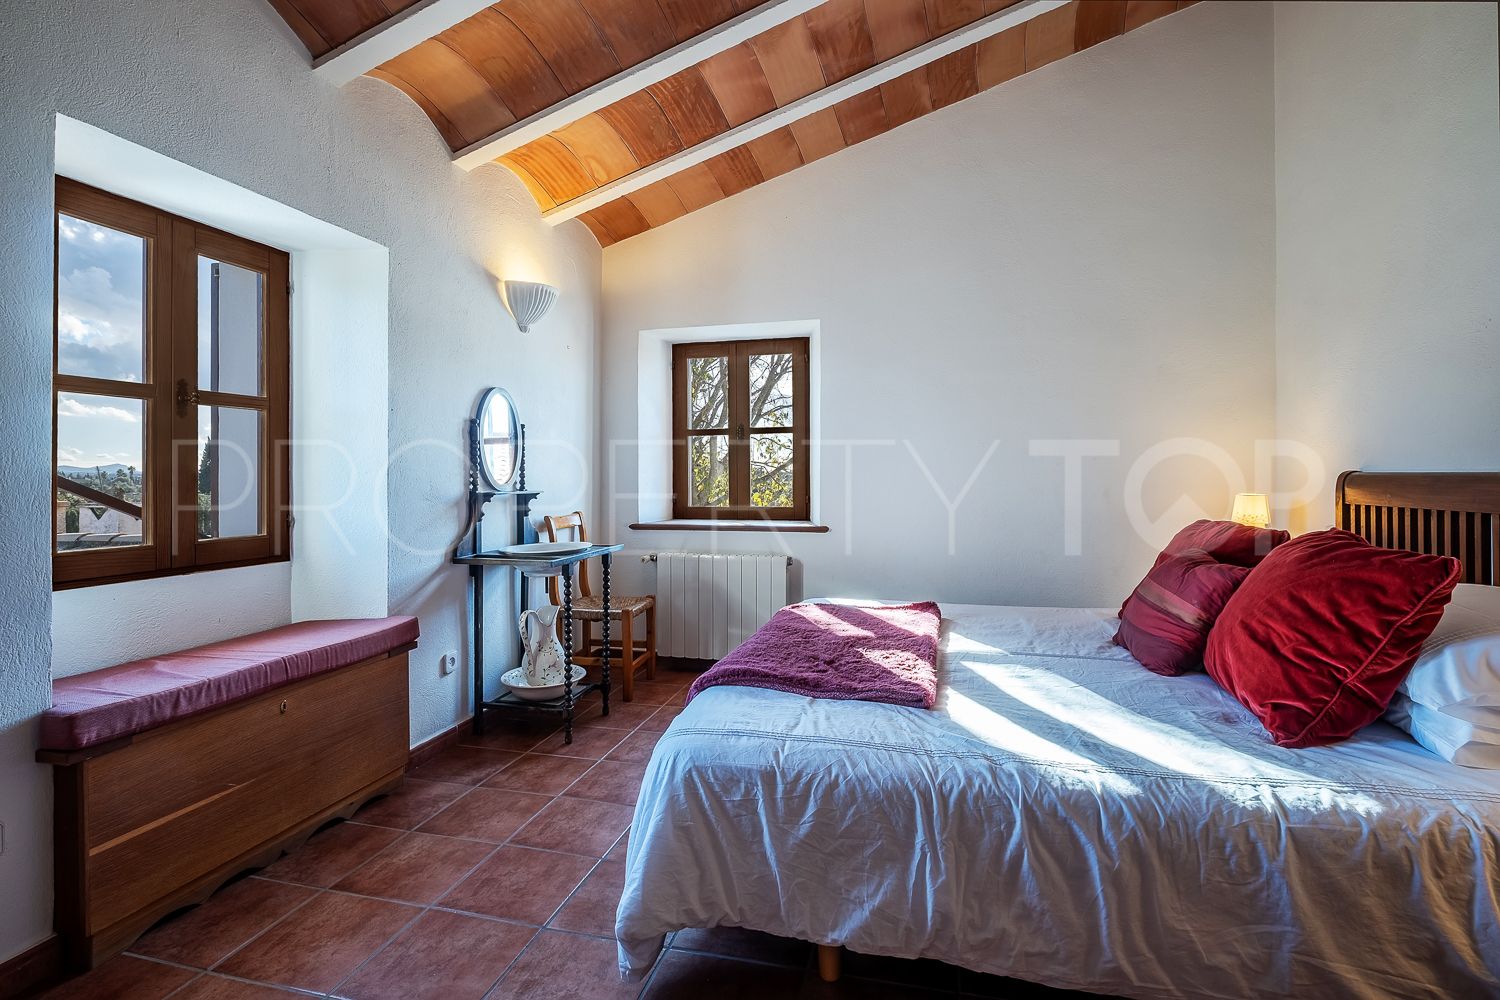 For sale house in Inca with 6 bedrooms